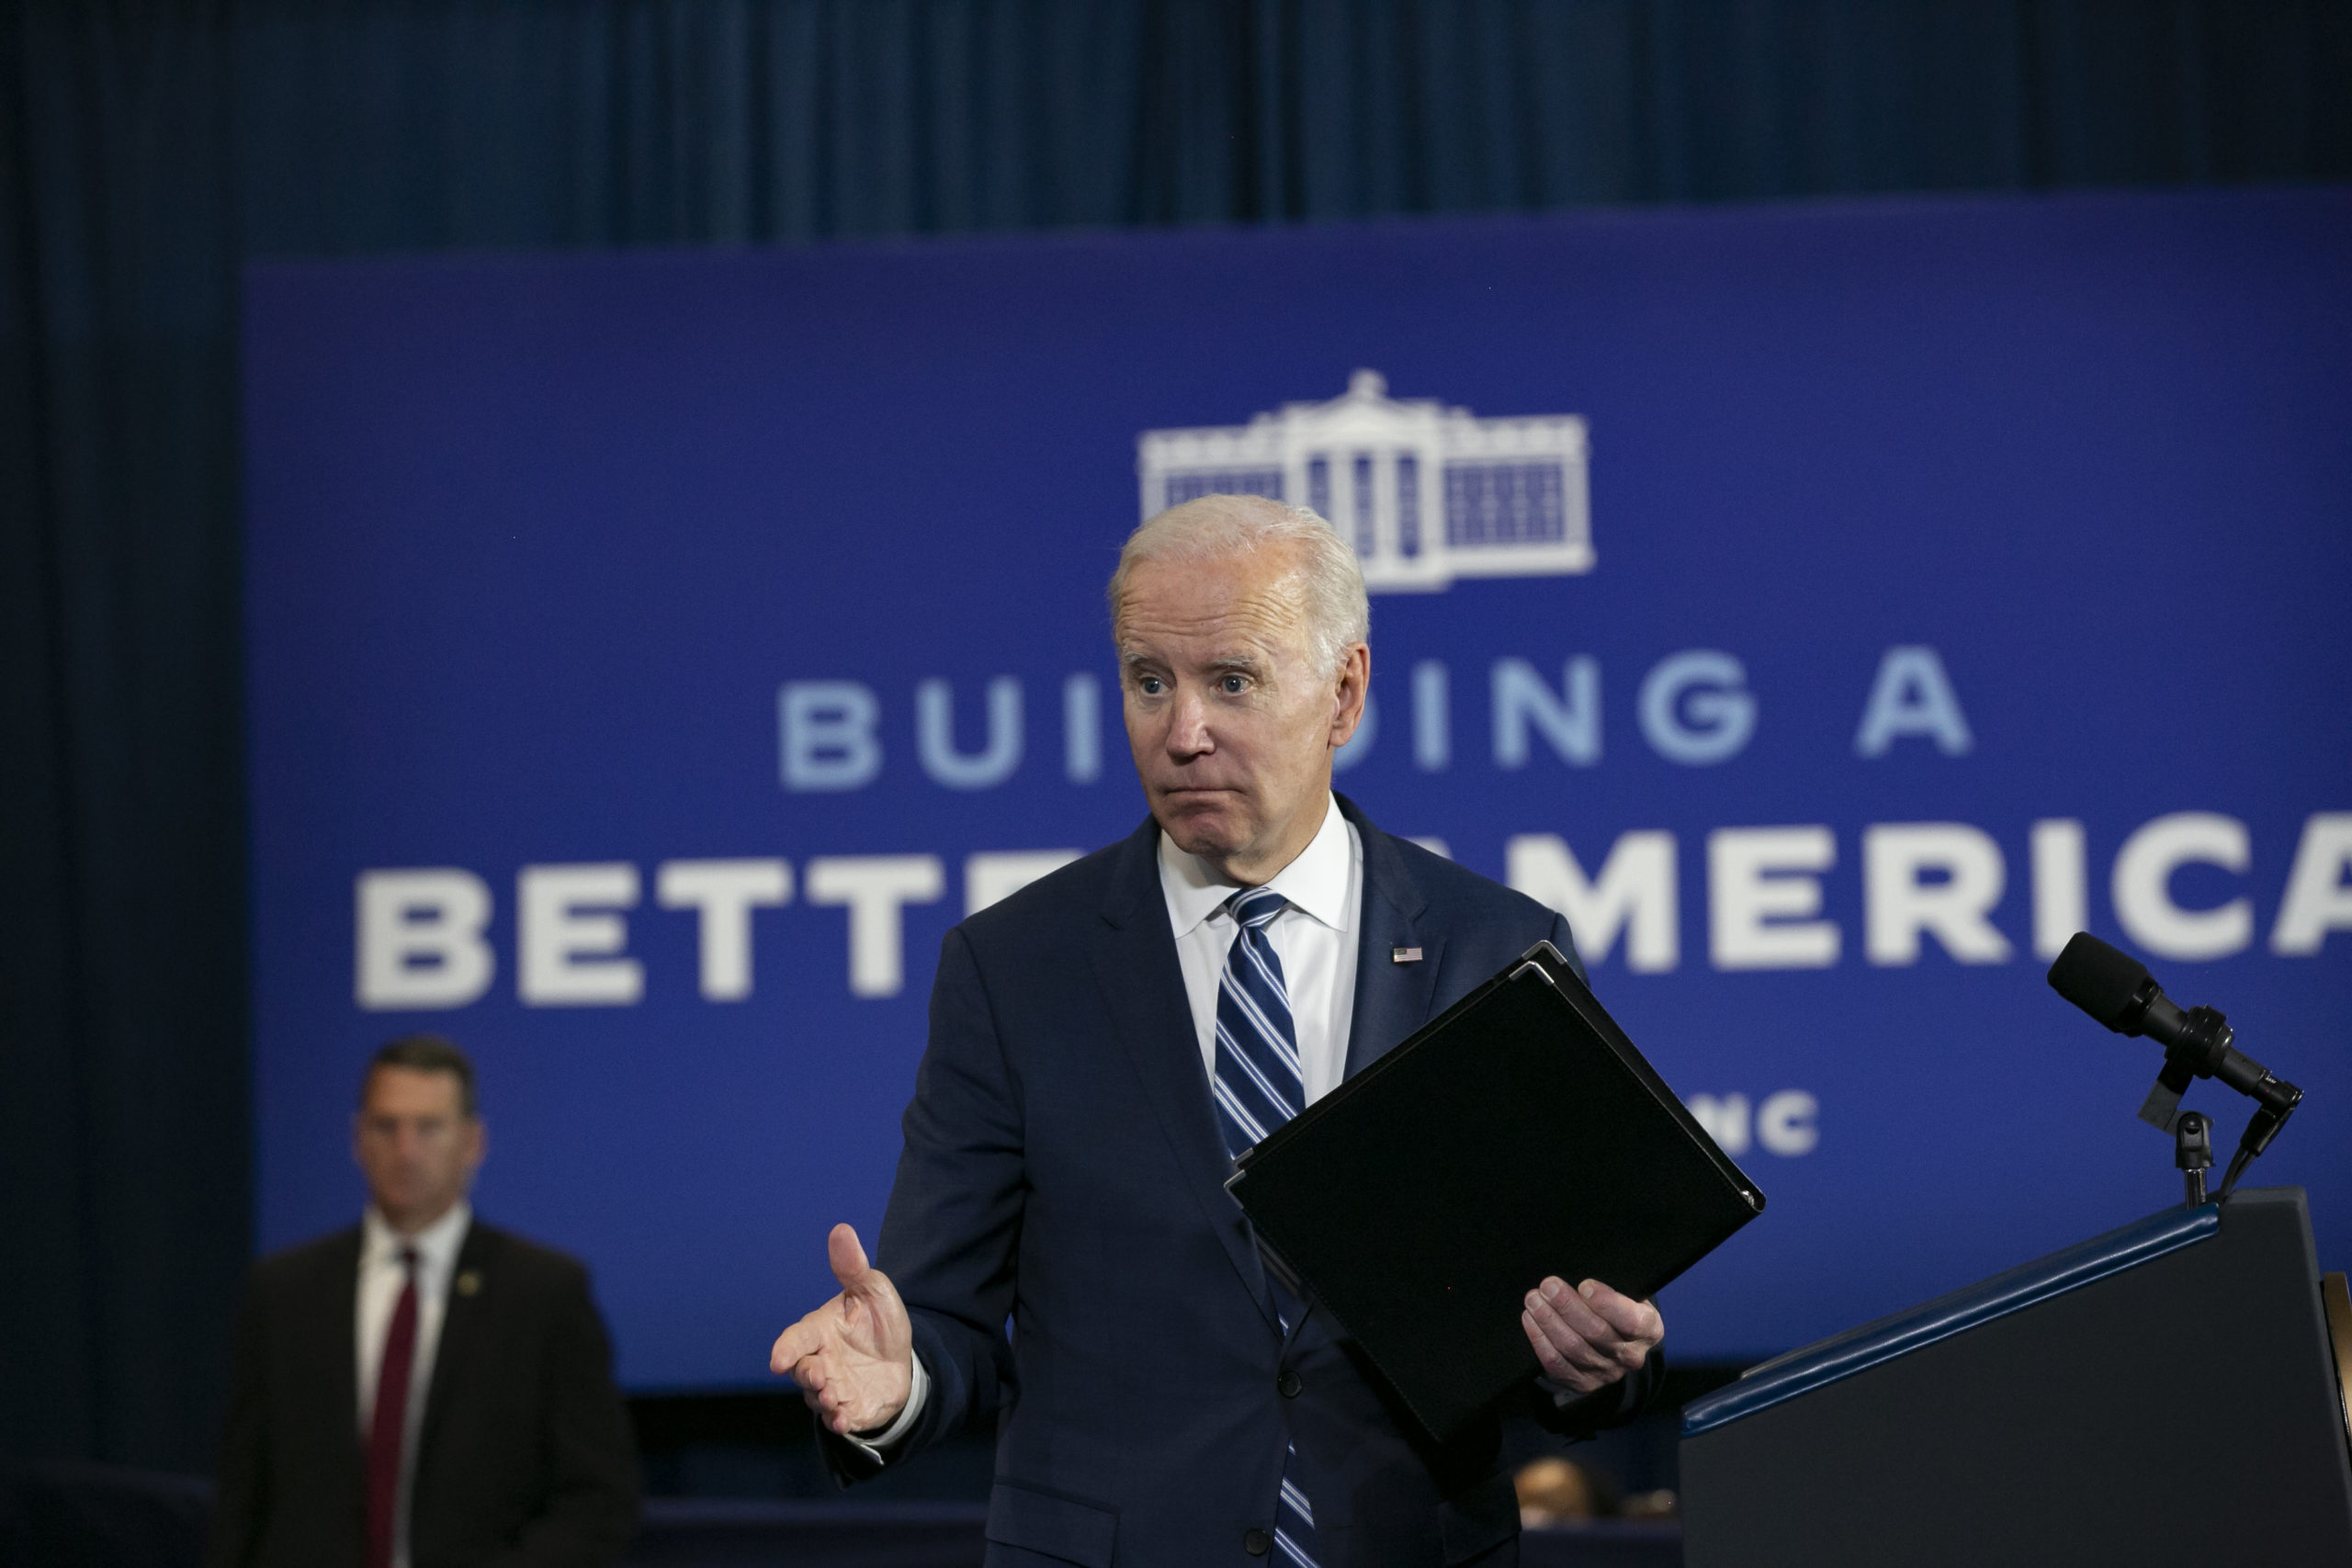 President Joe Biden speaks to guests during a visit to North Carolina Agricultural and Technical State University on April 14, 2022 in Greensboro, North Carolina. (Photo by Allison Joyce/Getty Images)